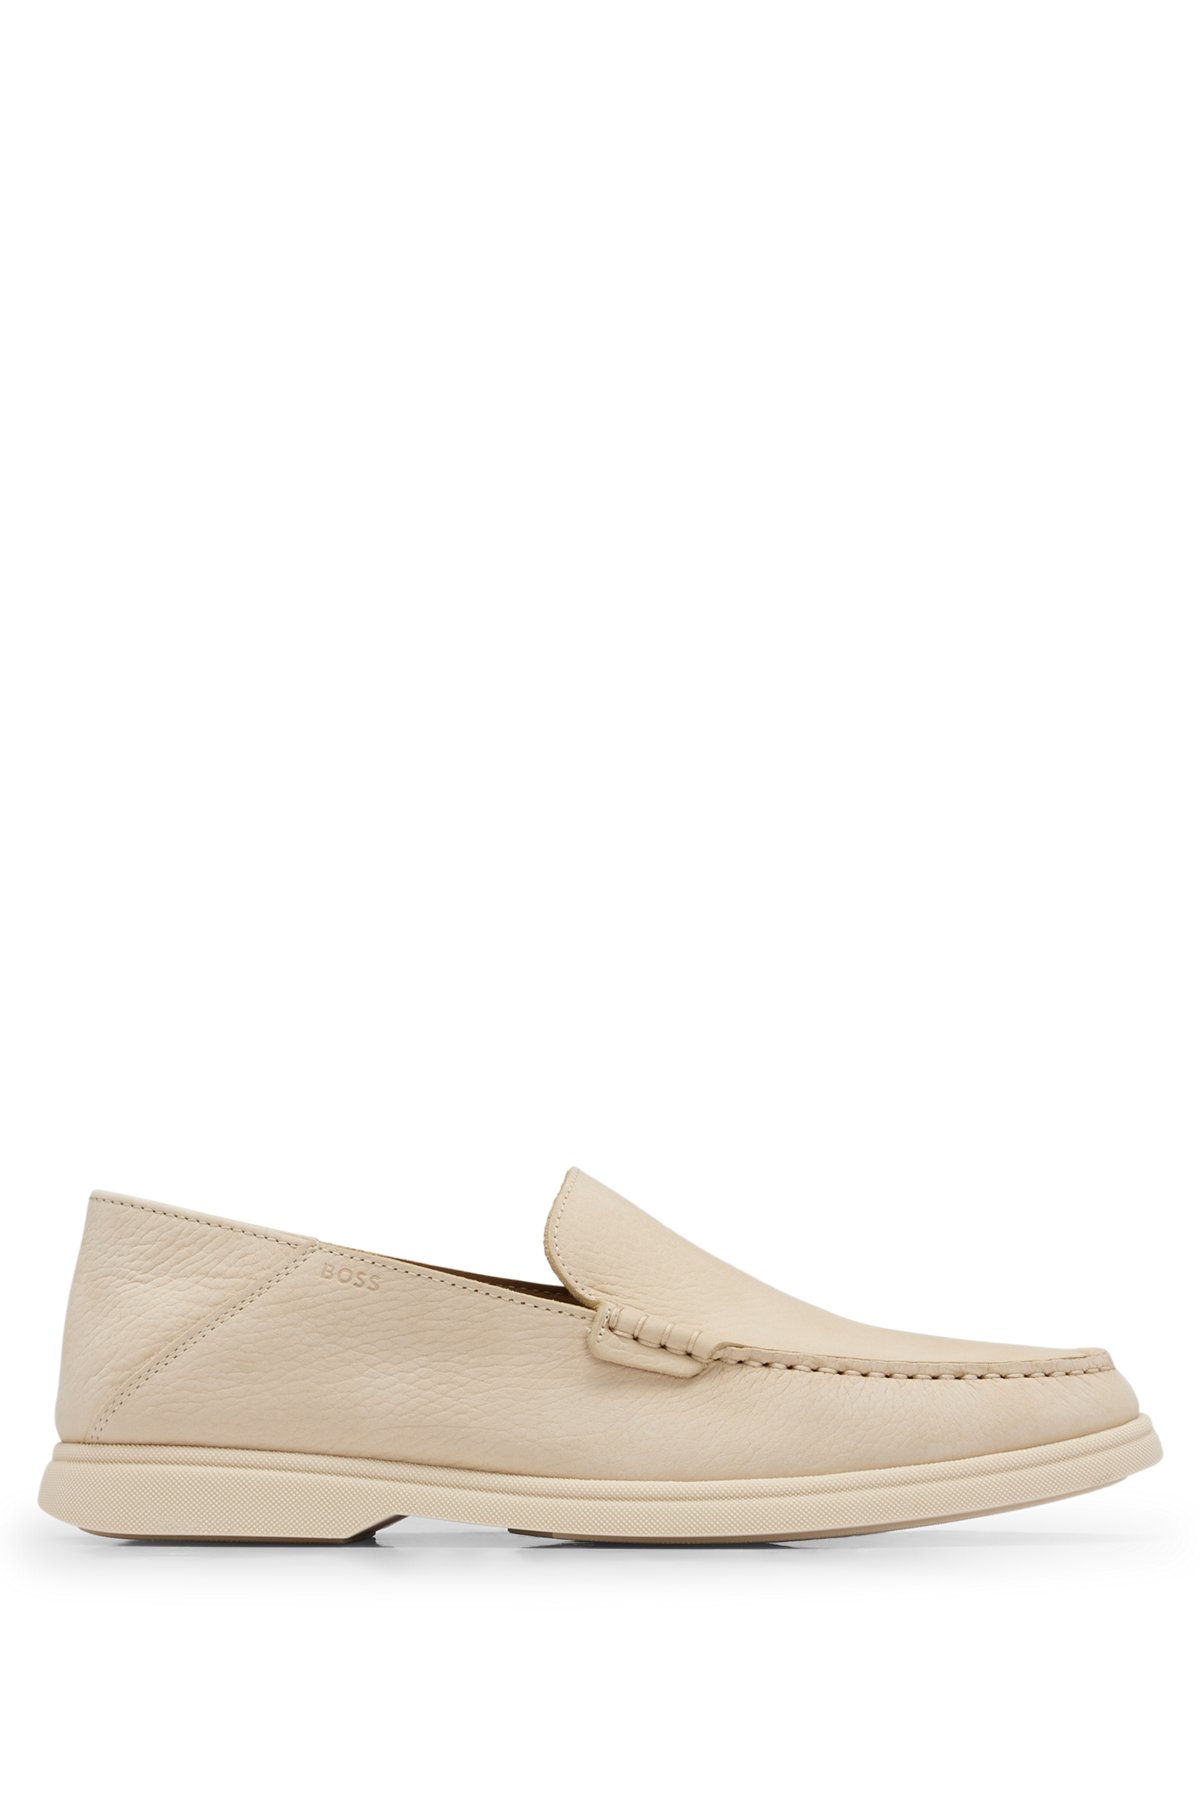 Nubuck moccasins with embossed logo and apron toe, Beige